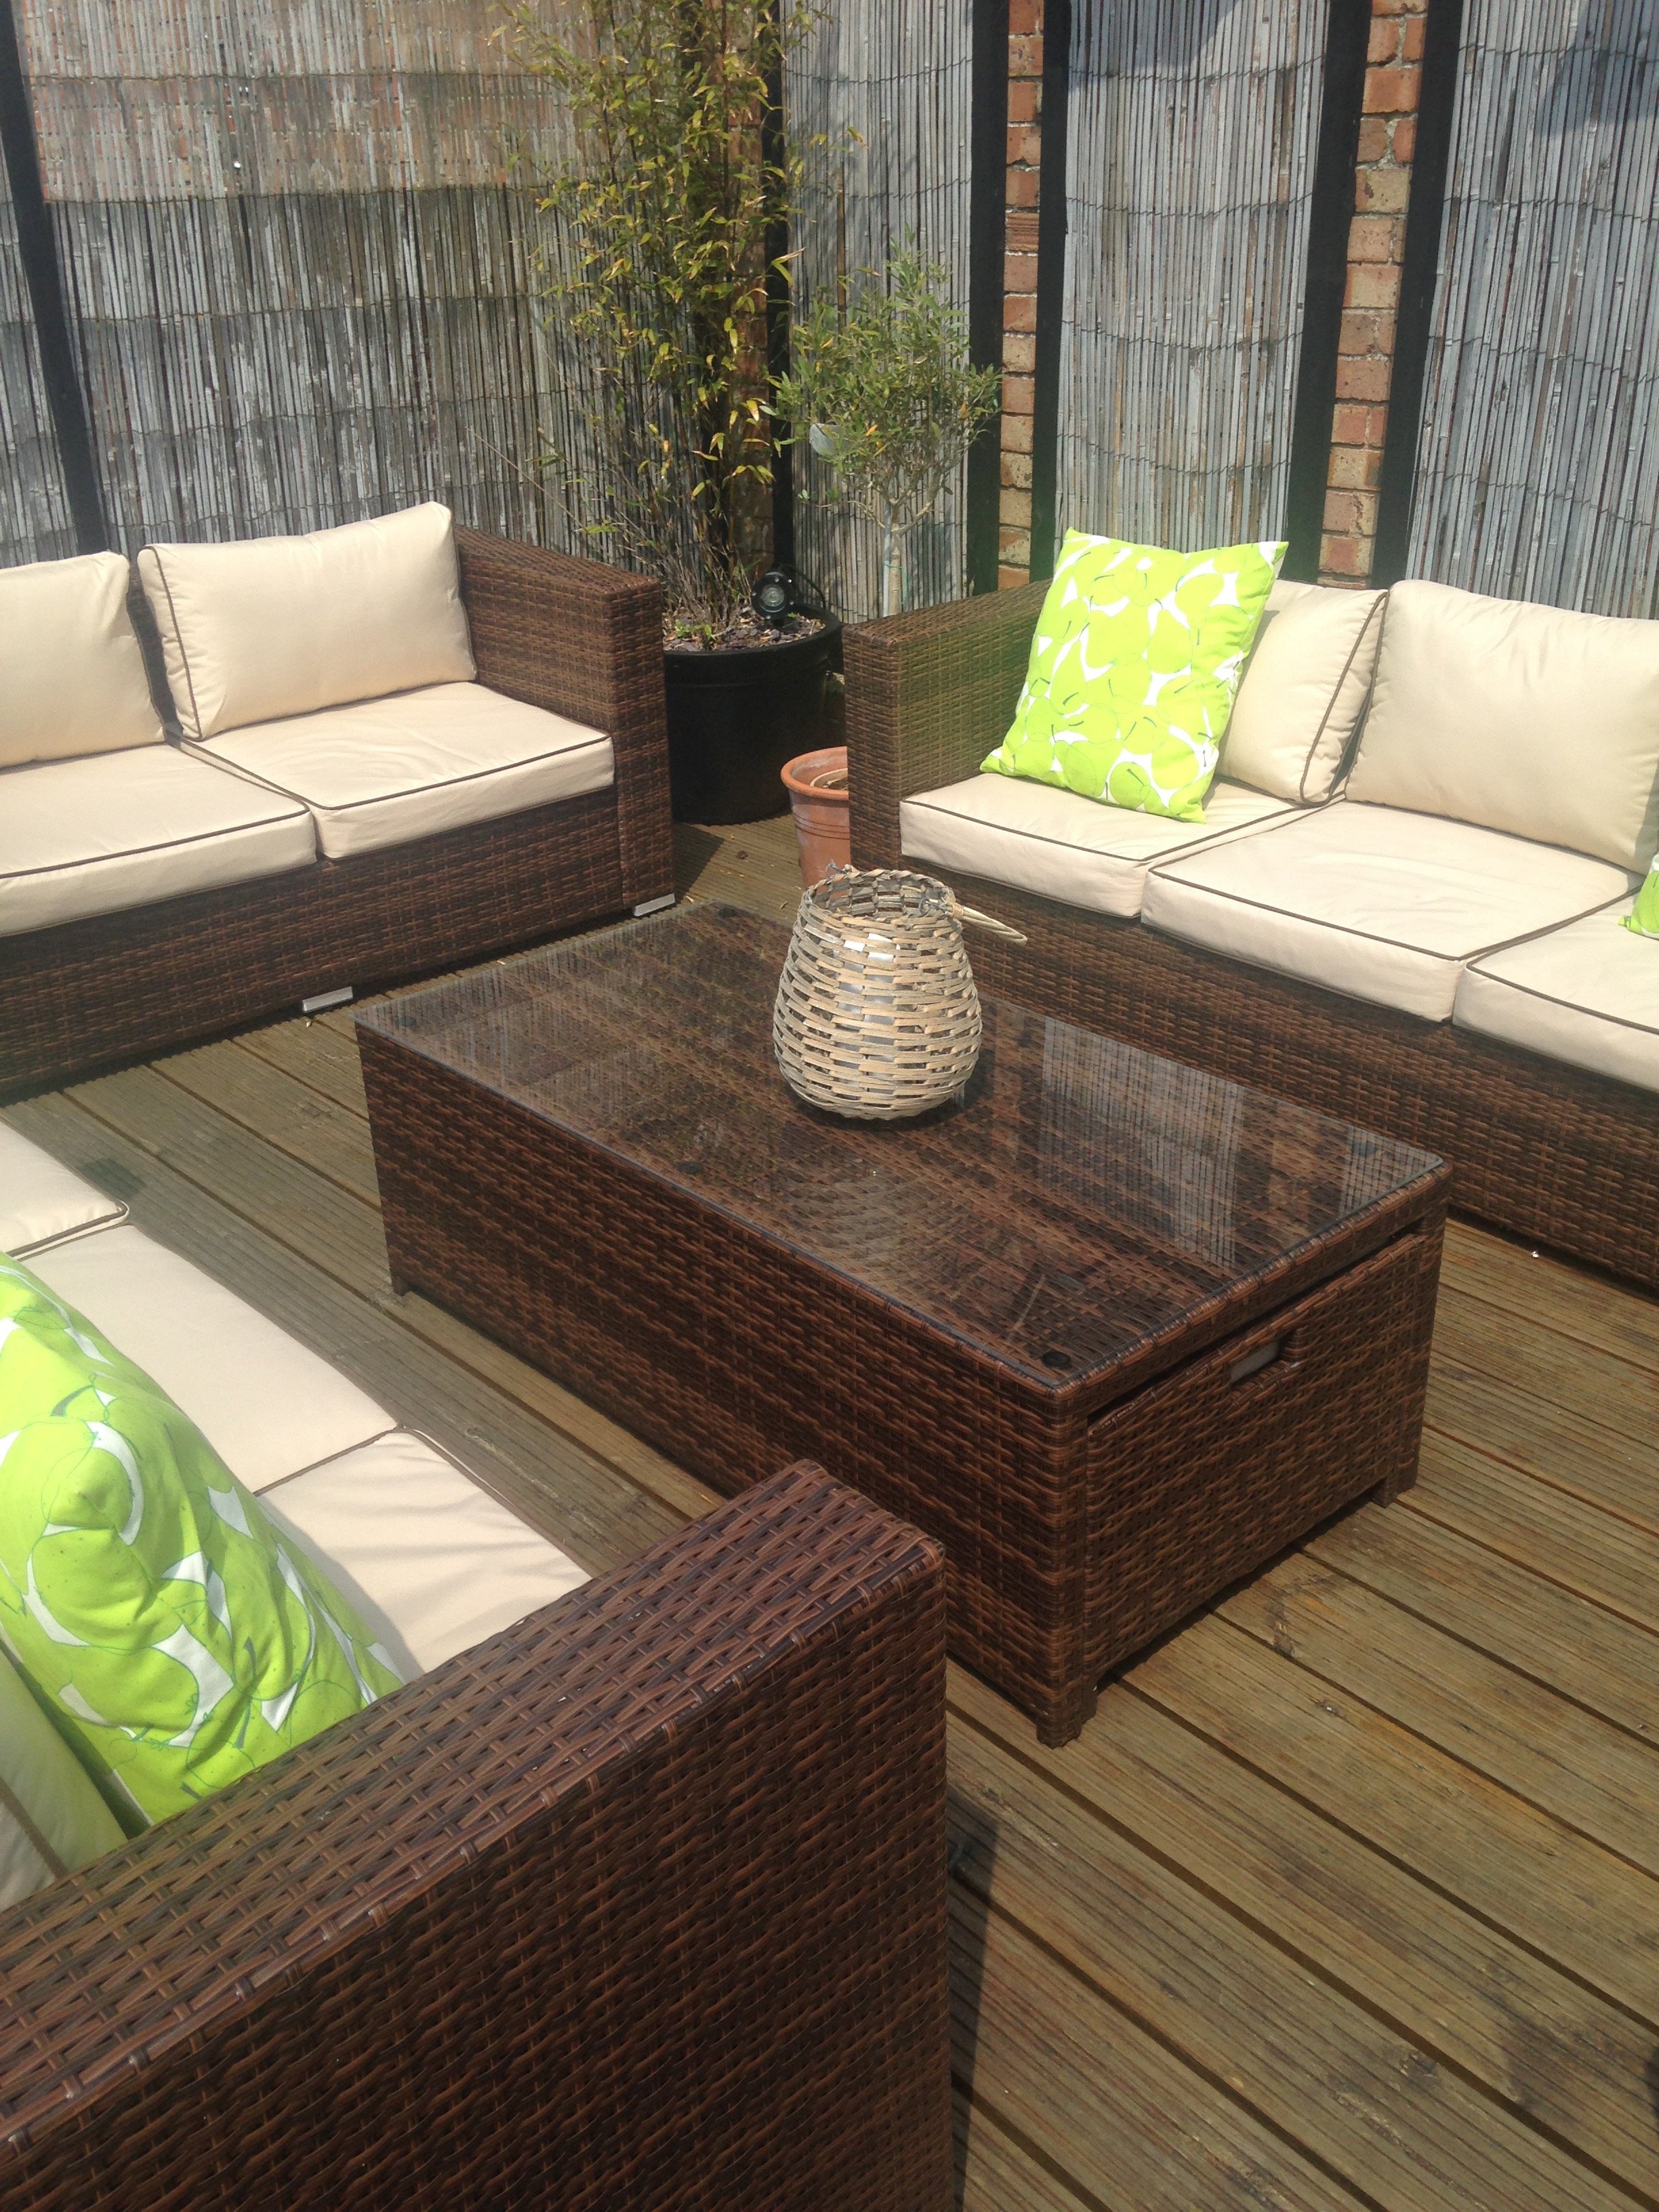 The best location for your rattan garden furniture